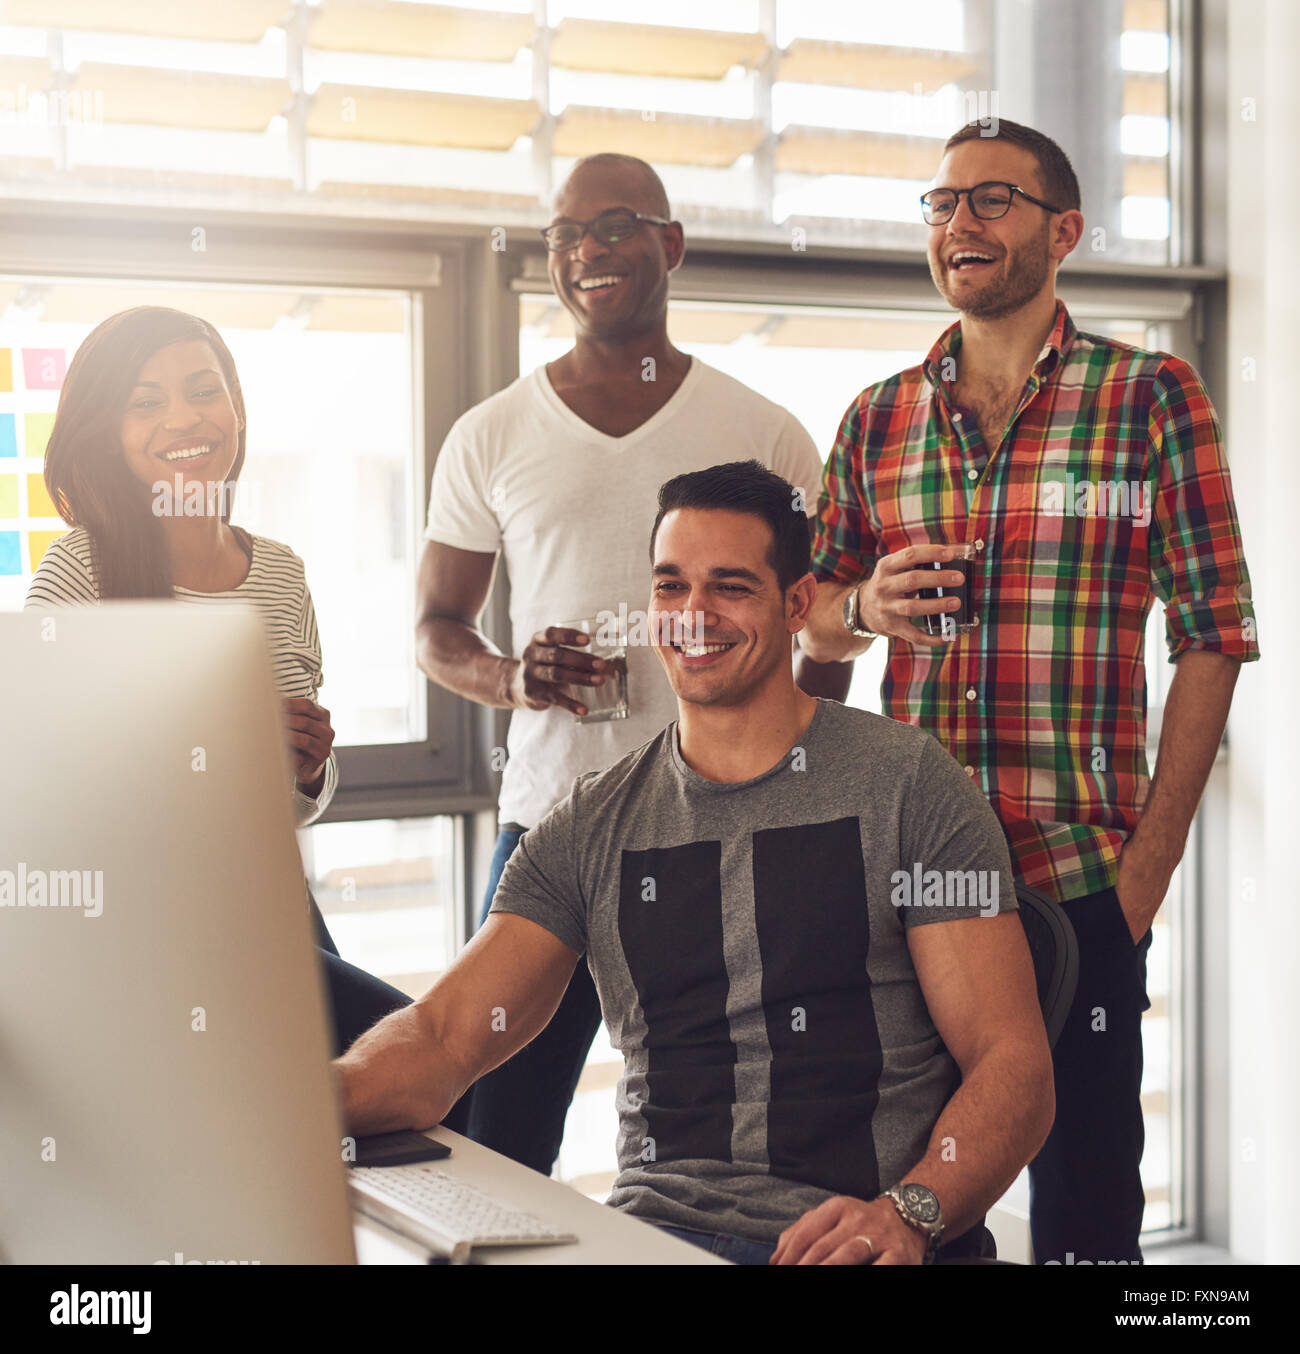 Happy quartet of Black, Hispanic and Caucasian young adults at desk smiling and laughing while looking at computer monitor with Stock Photo